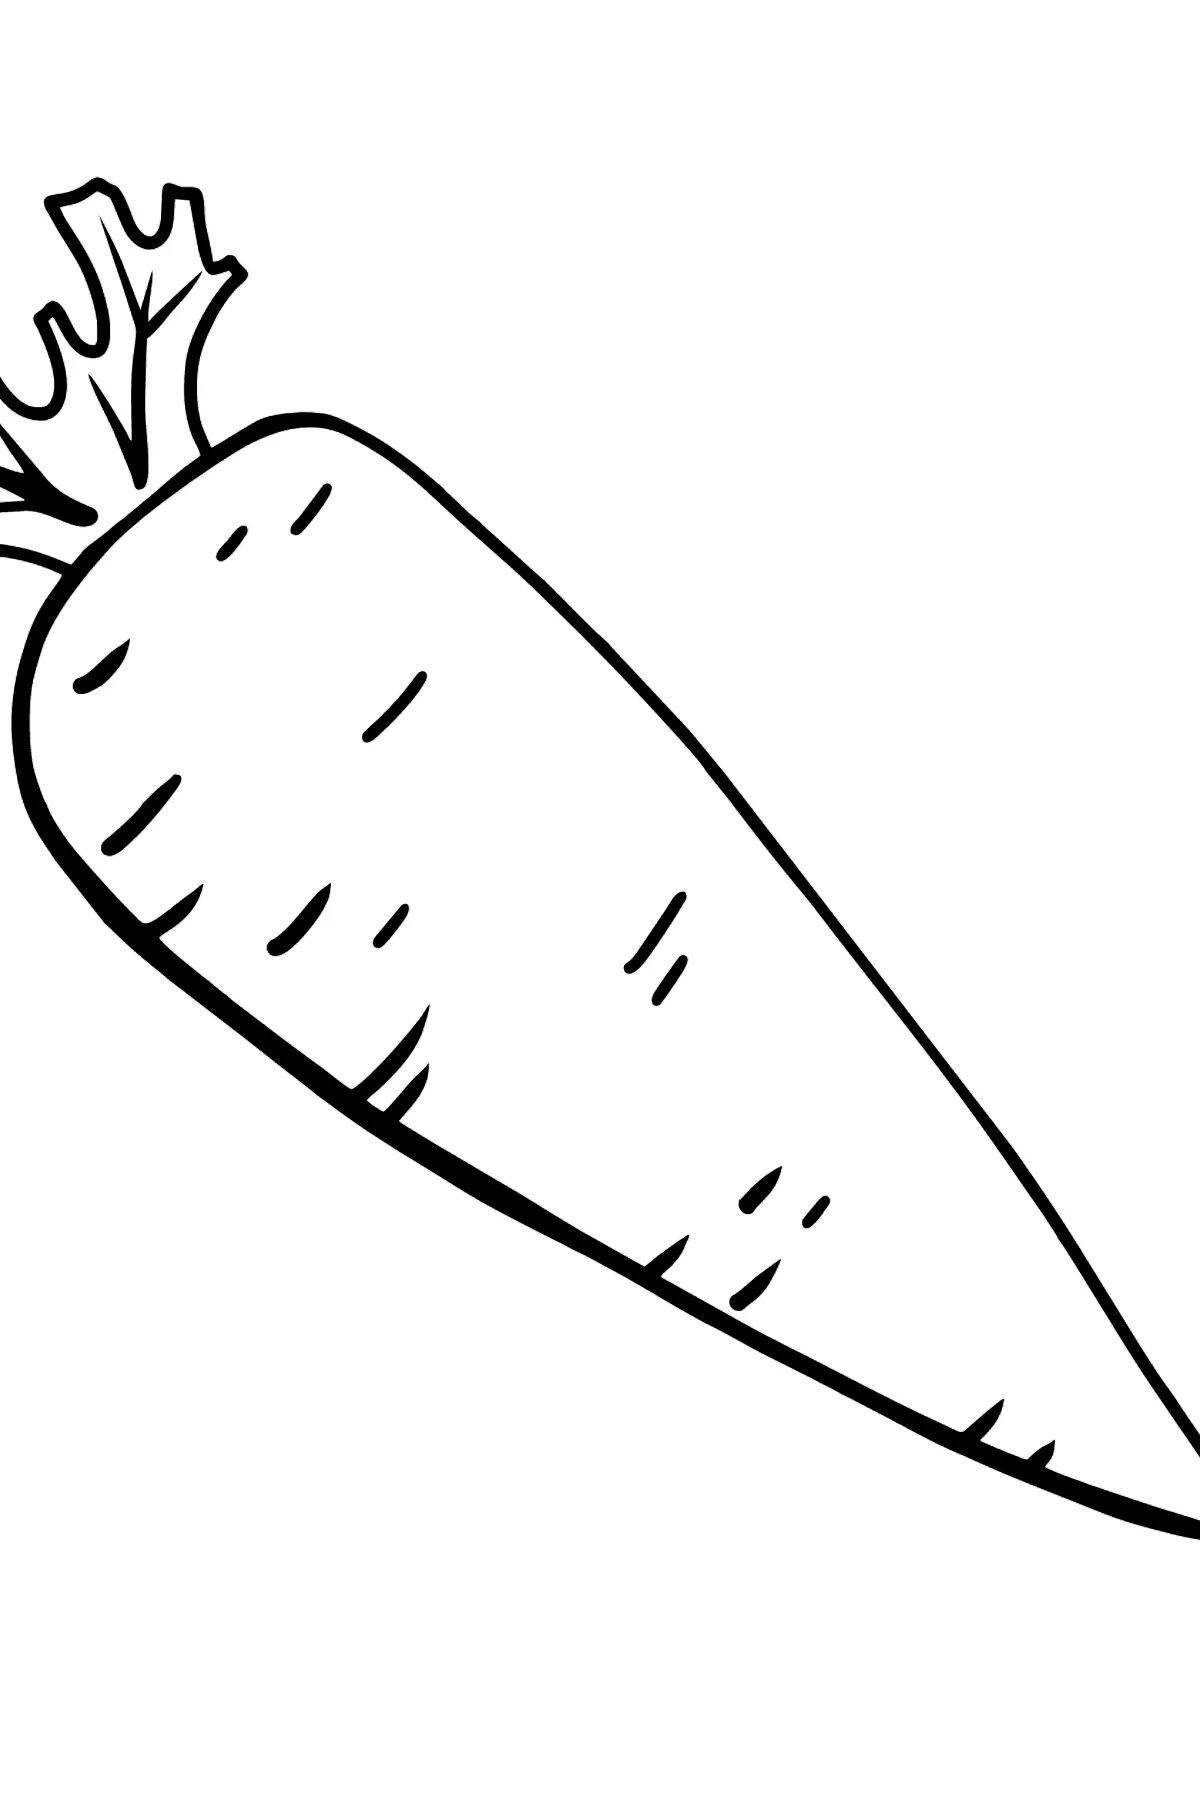 Playful carrot drawing for kids